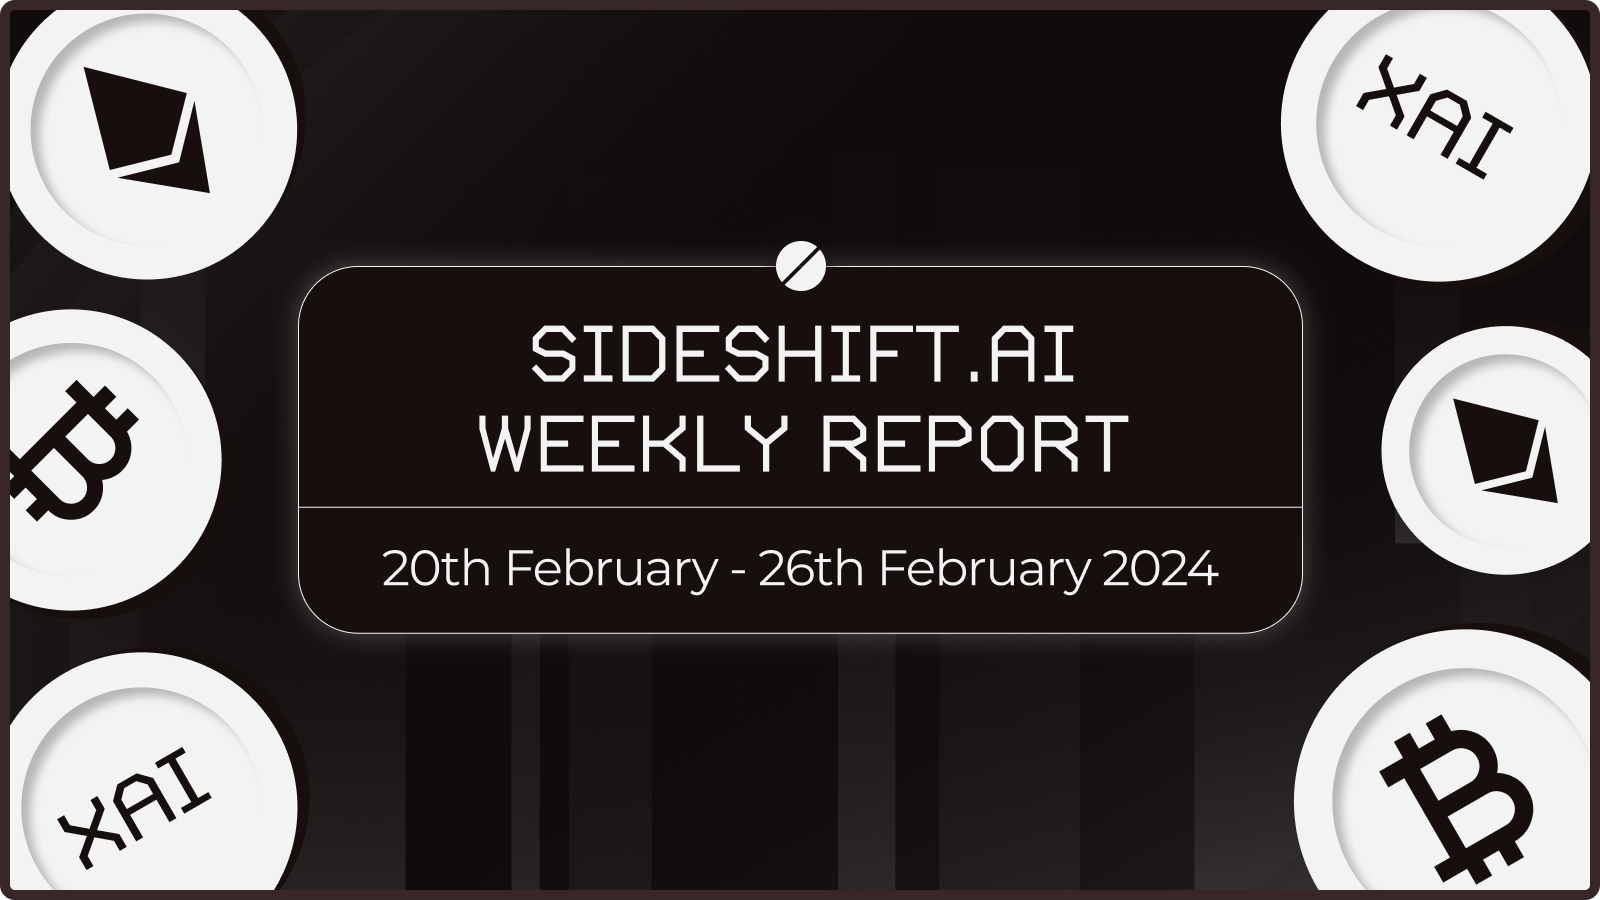 SideShift.ai Weekly Report | 20th - 26th February 2024